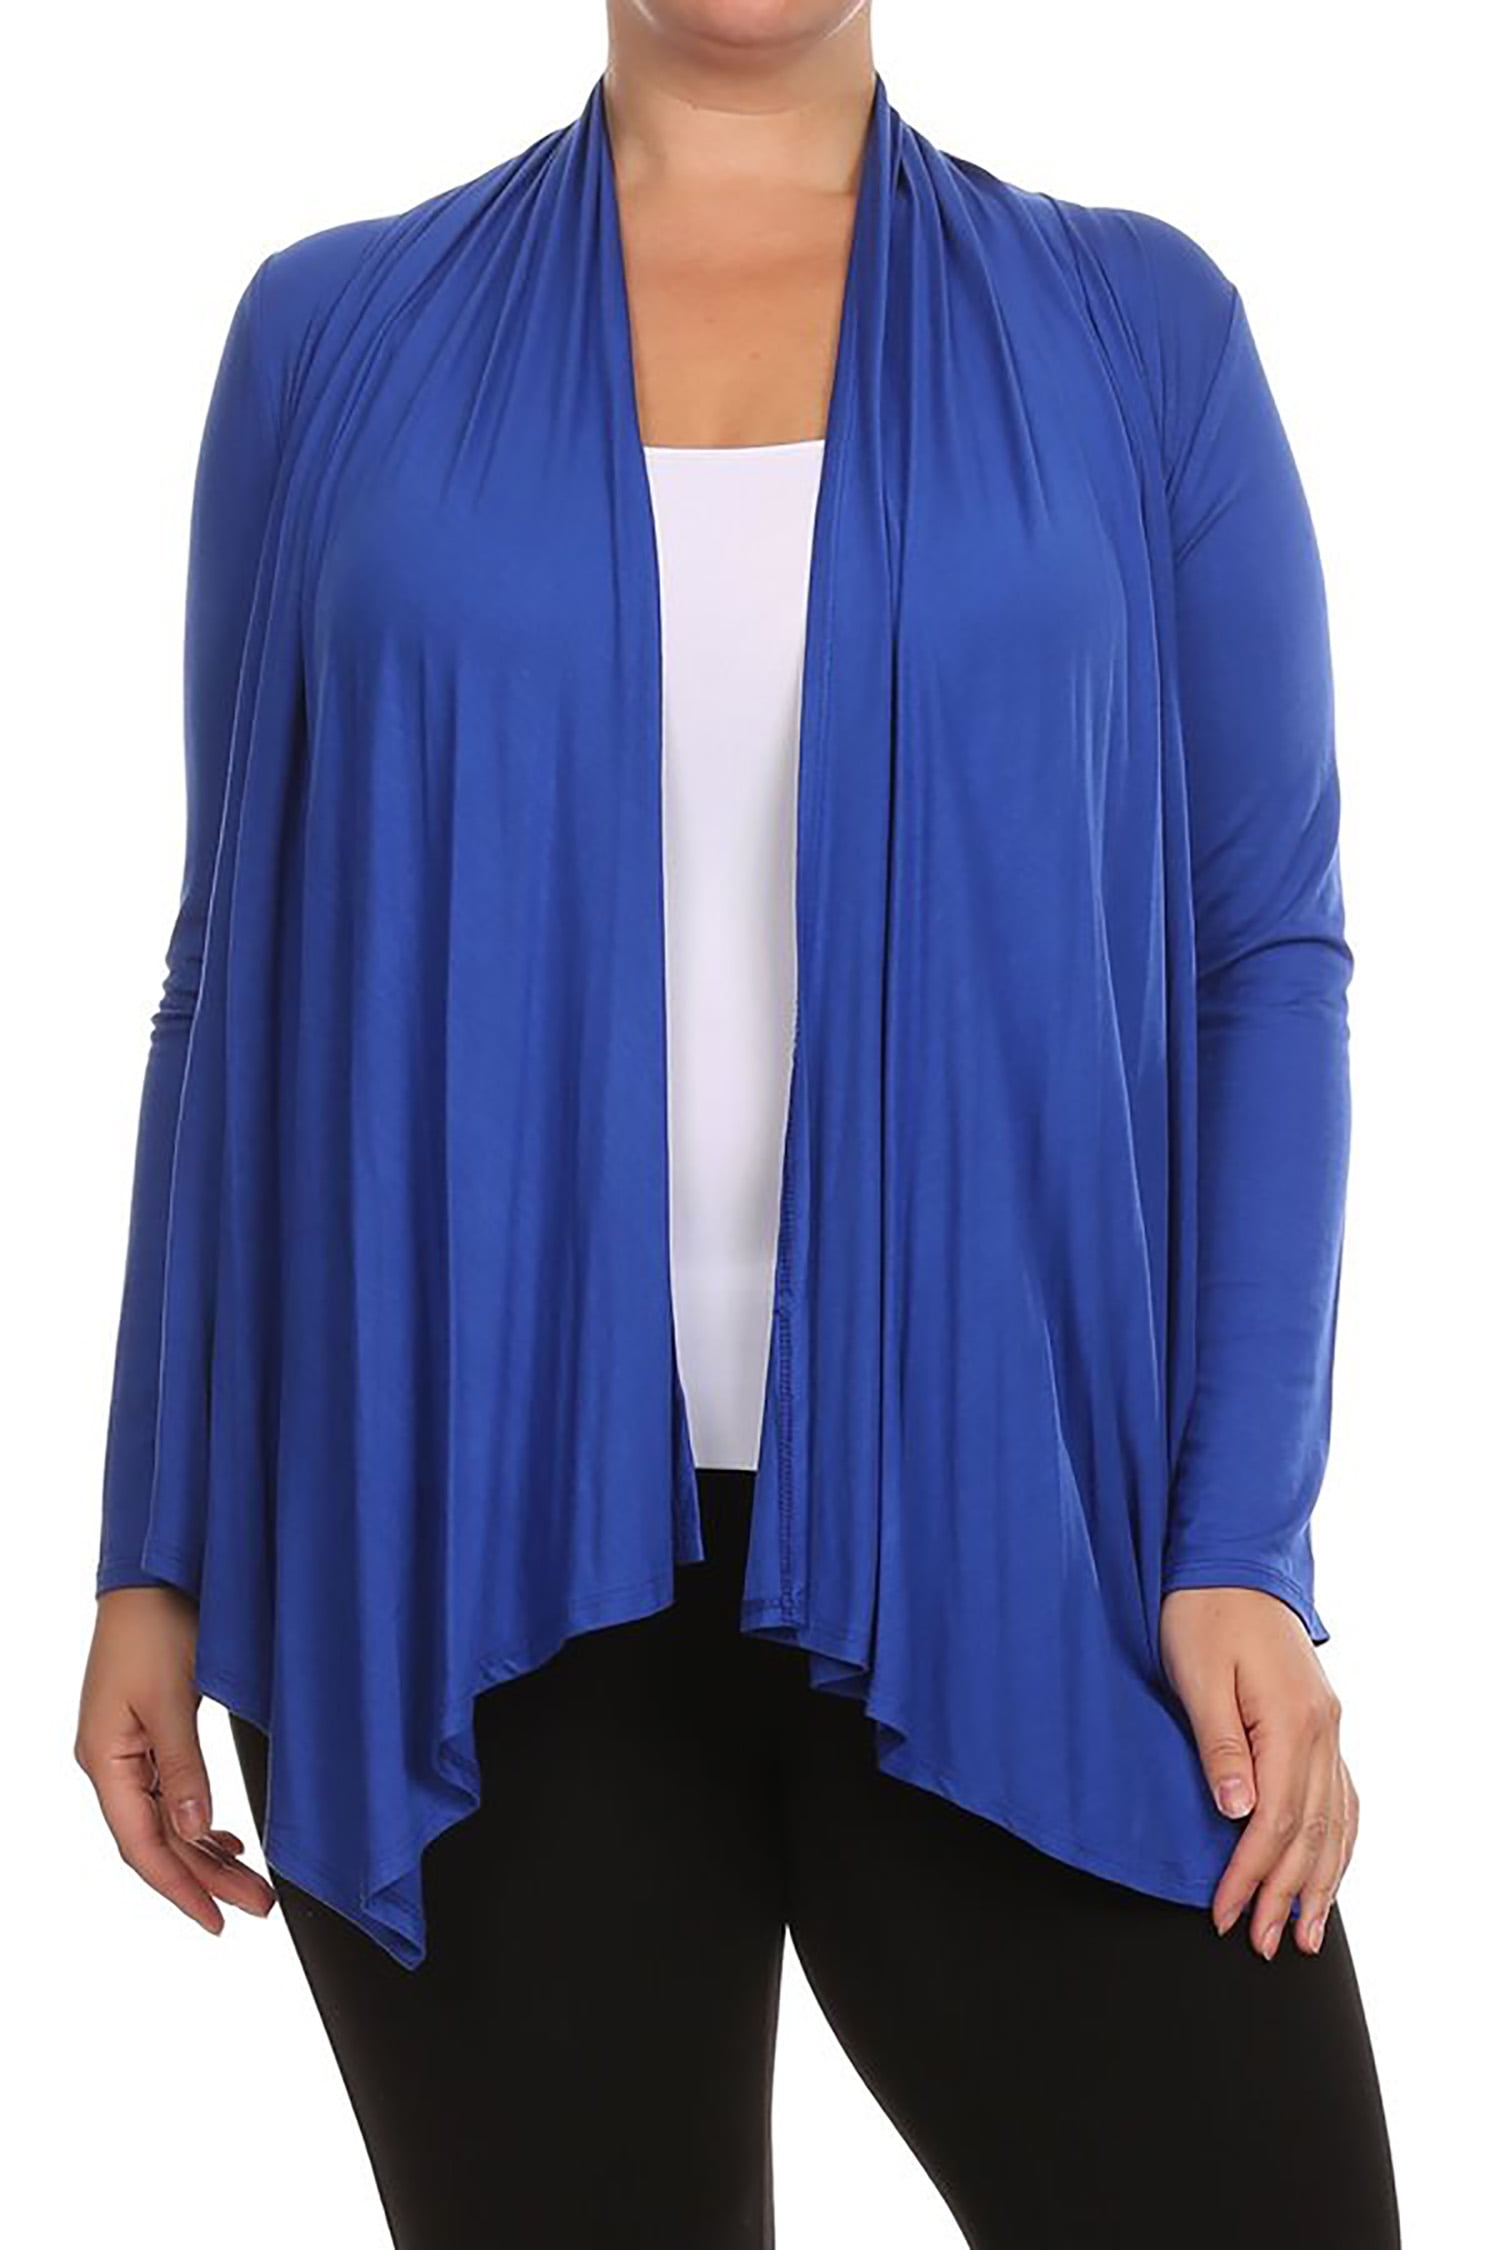 Women's Solid Plus Size Open Front Long Sleeve Lightweight Soft Basic ...